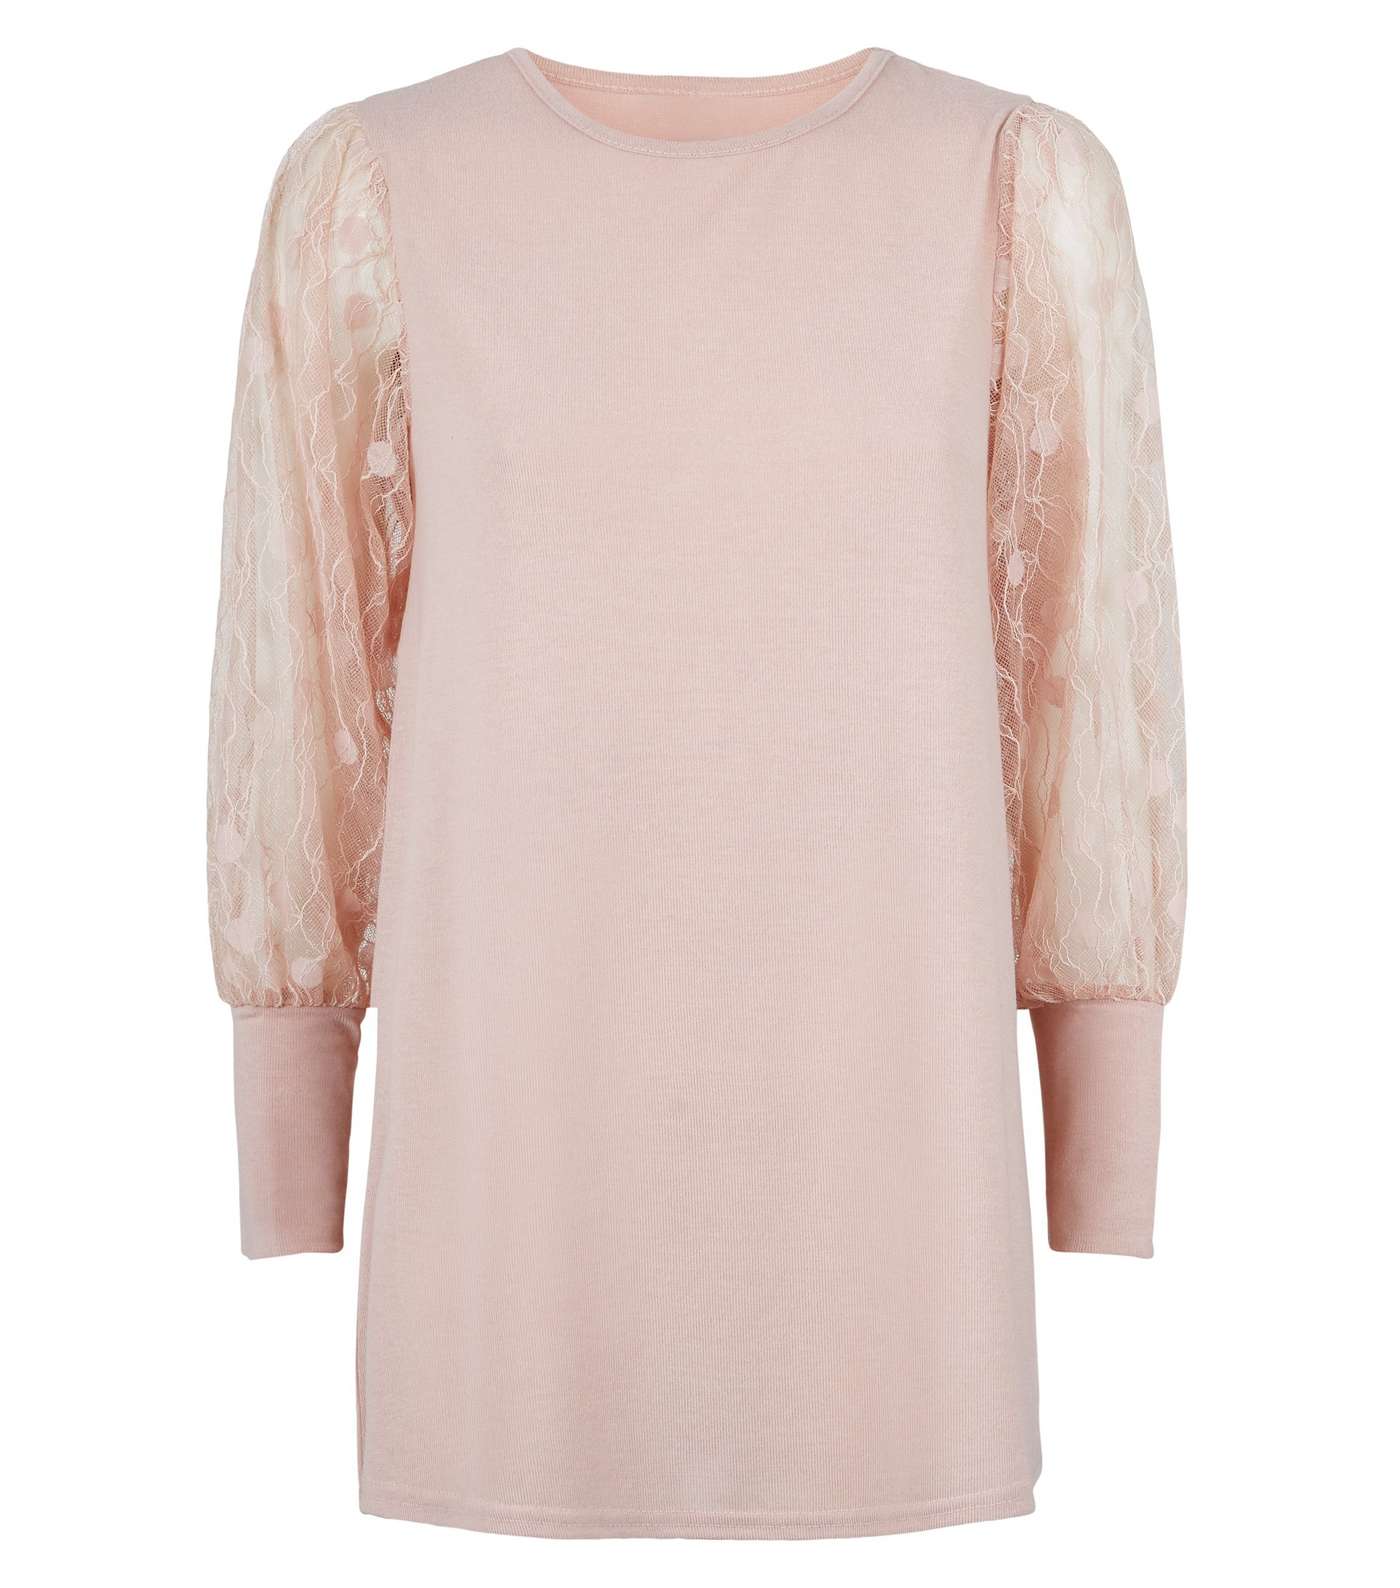 Blue Vanilla Pink Lace Sleeve Top Image 4